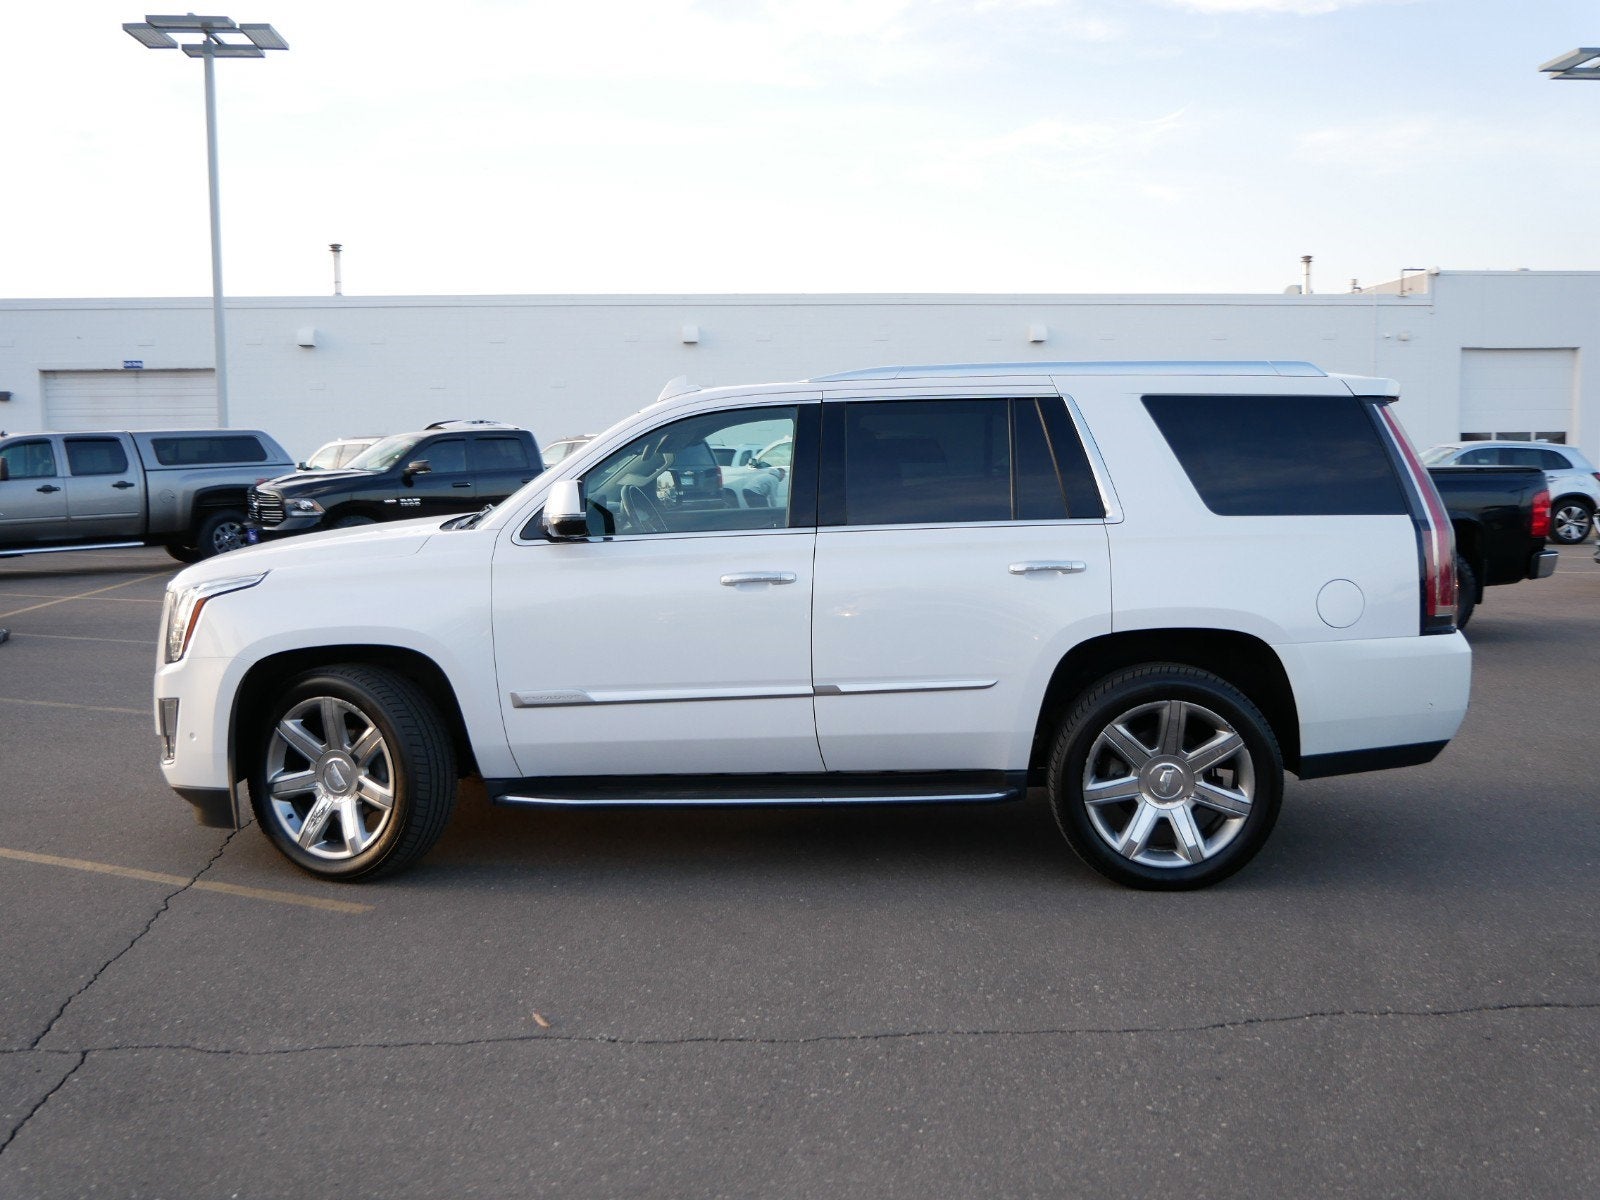 Used 2018 Cadillac Escalade Luxury with VIN 1GYS4BKJ8JR363555 for sale in Fridley, Minnesota